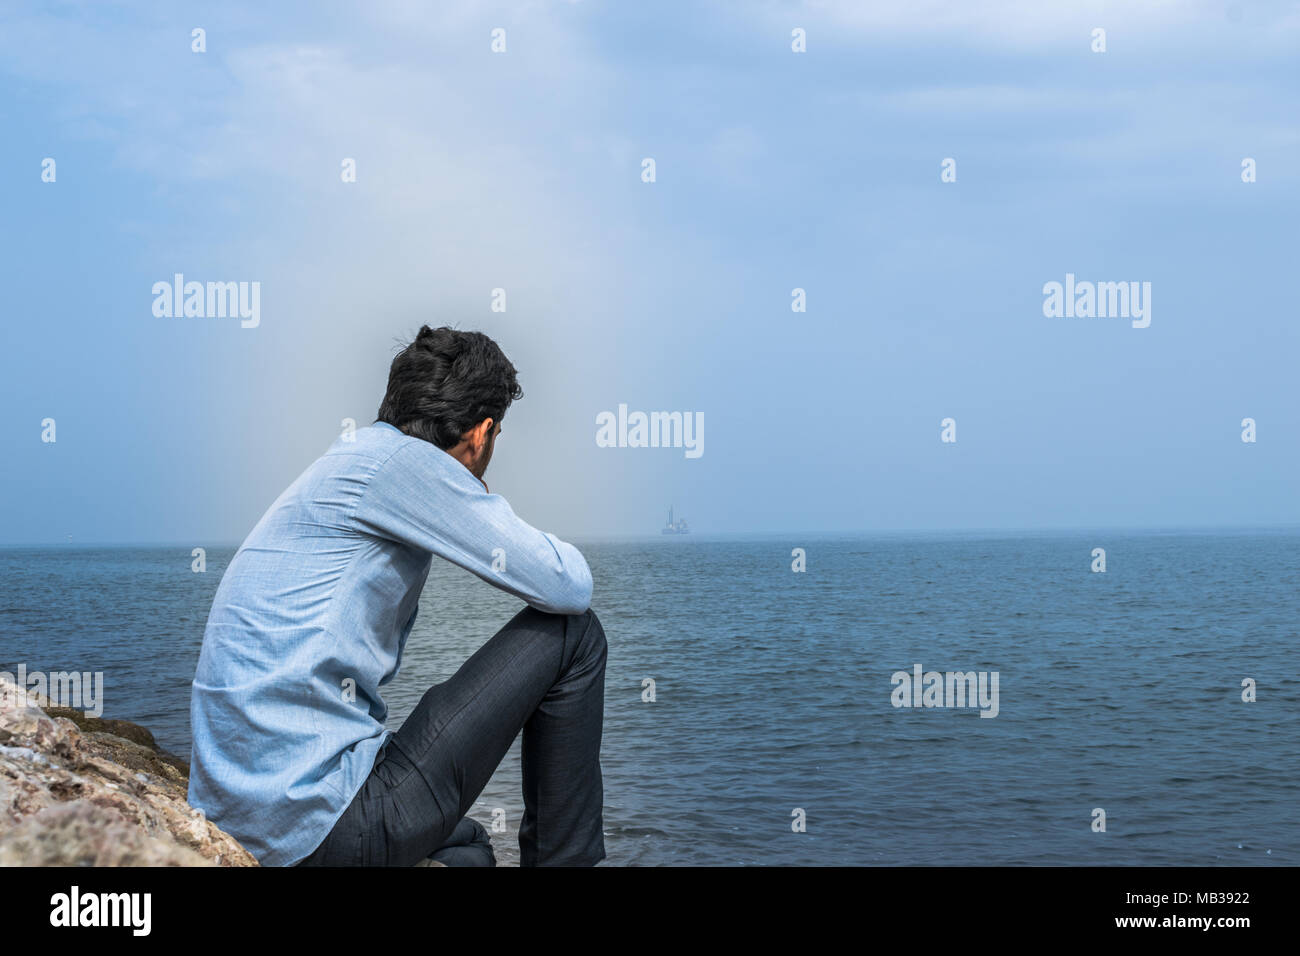 a lonely depressed man after divorced is sitting on the sea rocks and looking to the sea wearing shirt and black paint Stock Photo